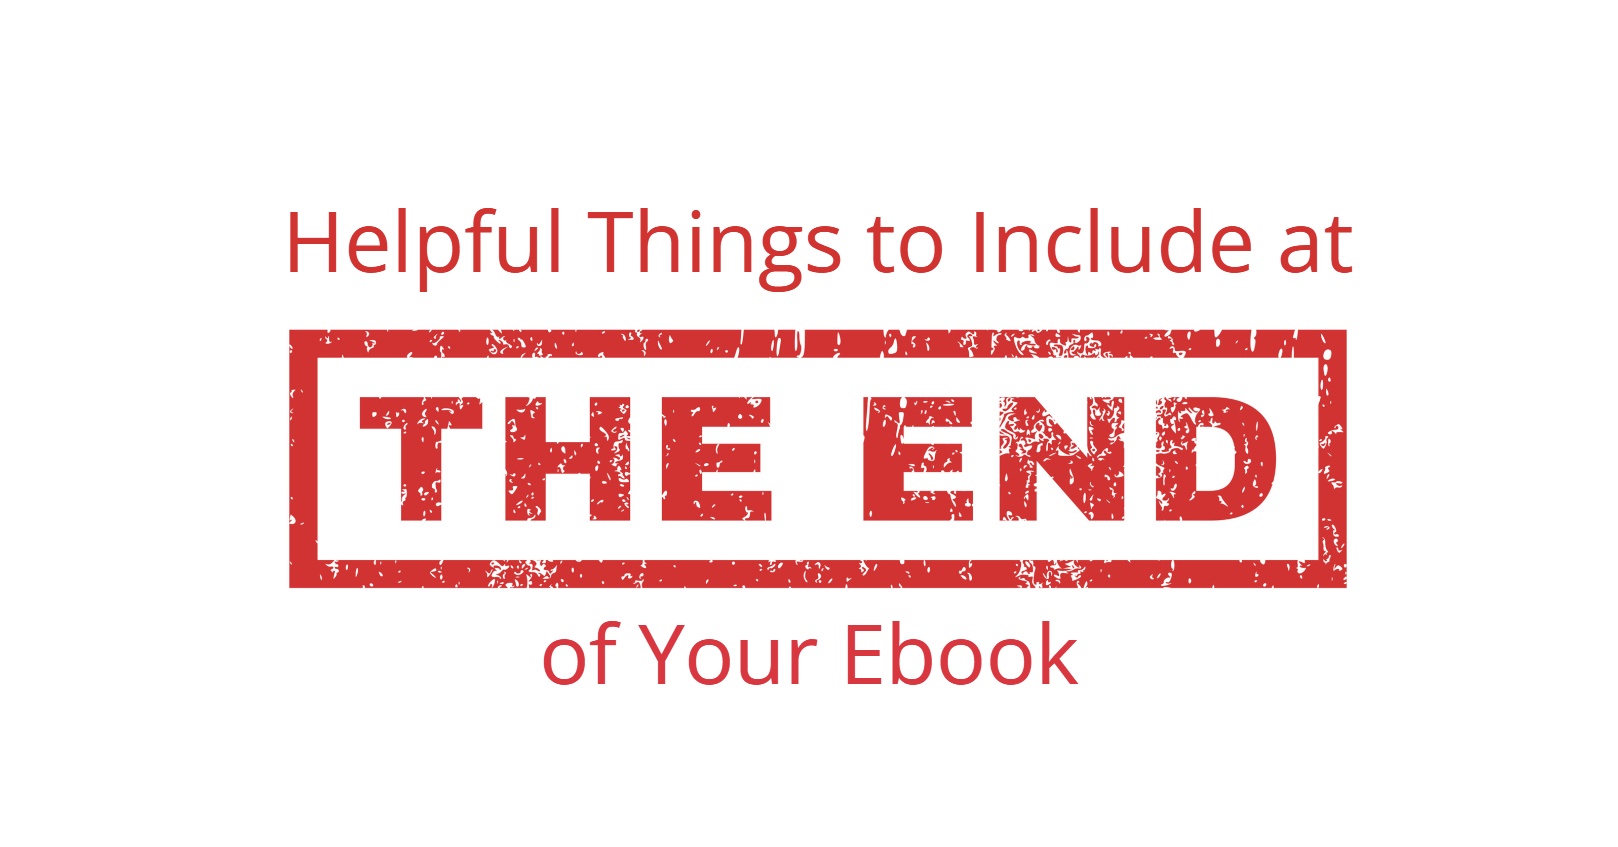 Helpful Things to Include at the End of Your Ebook